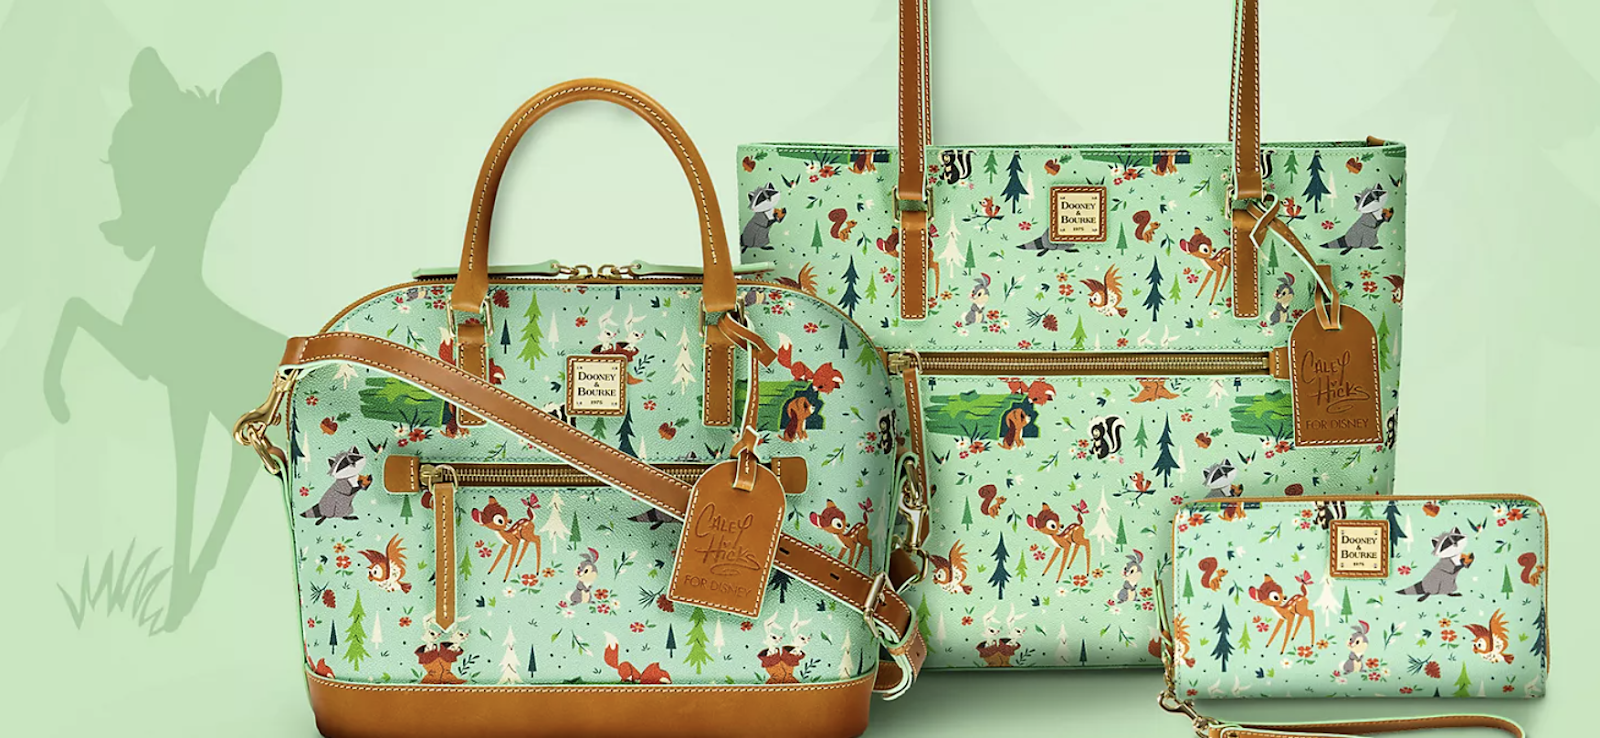 Bambi and Friends Dooney & Bourke Collection Bounds on to shopDisney